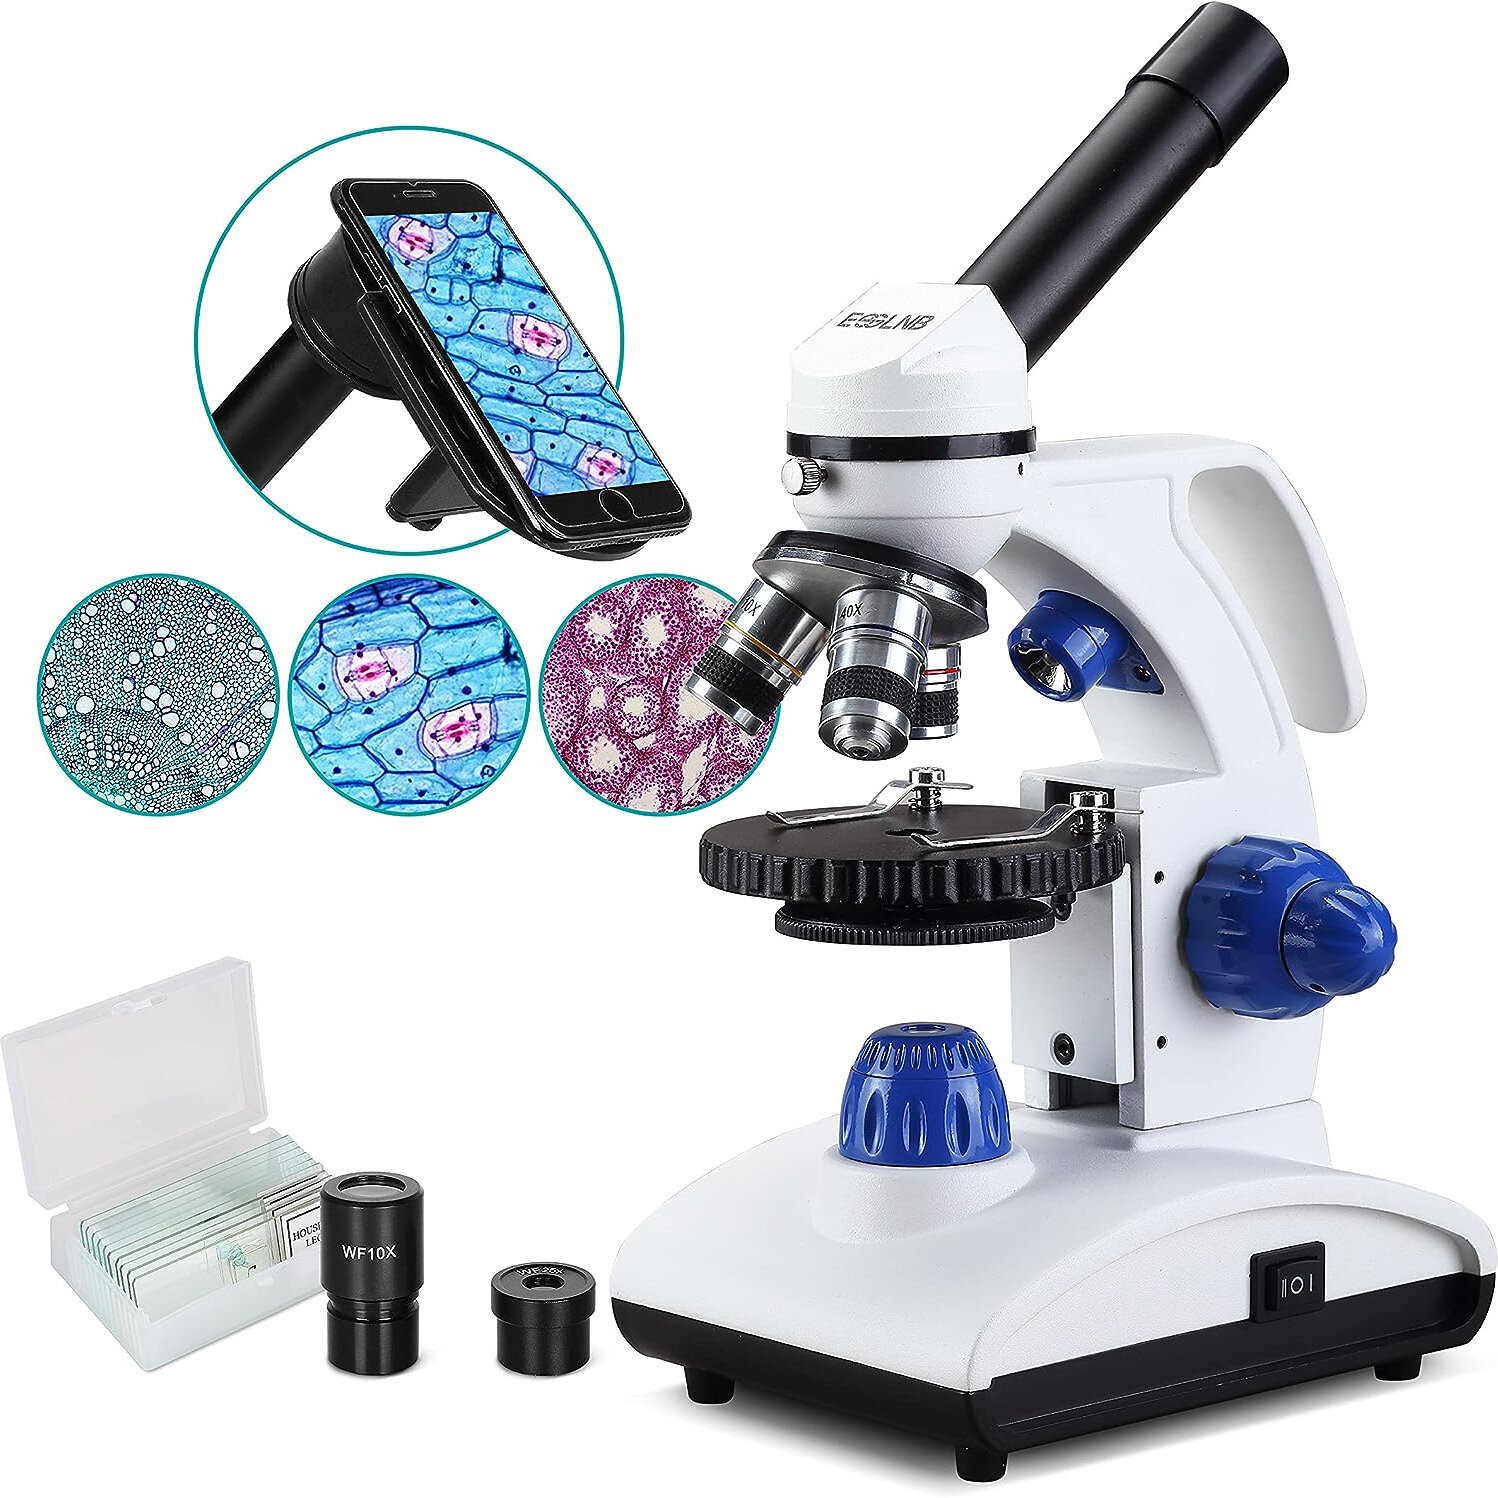 

[US Direct] ESSLNB ES1045 Microscope 1000X Student Microscope for Kids LED Biological Light Microscope with Slides and P